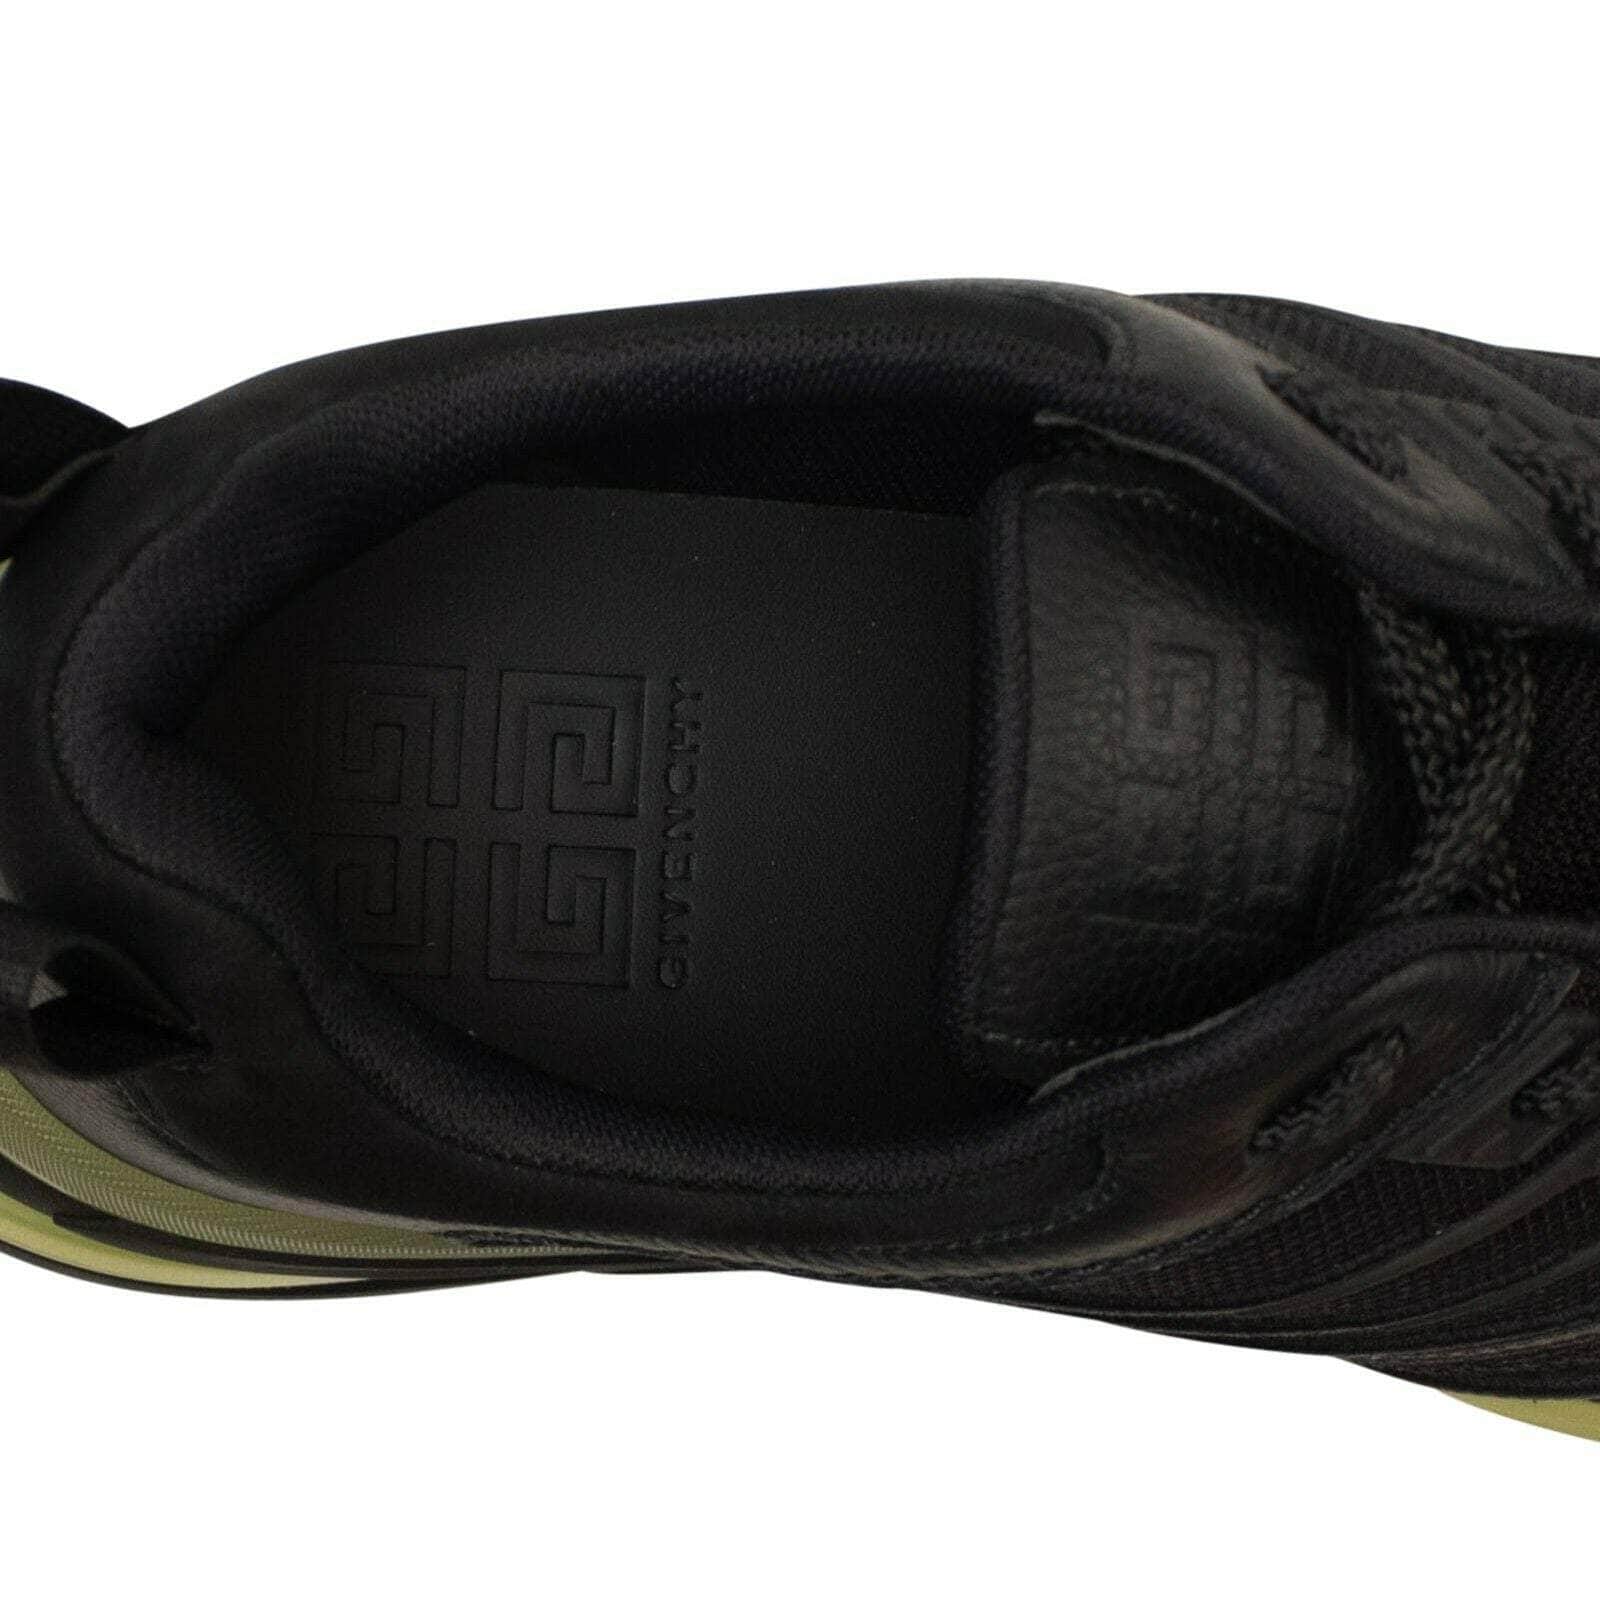 Givenchy Men's Black and Green Leather and Mesh Low-Top Sneakers